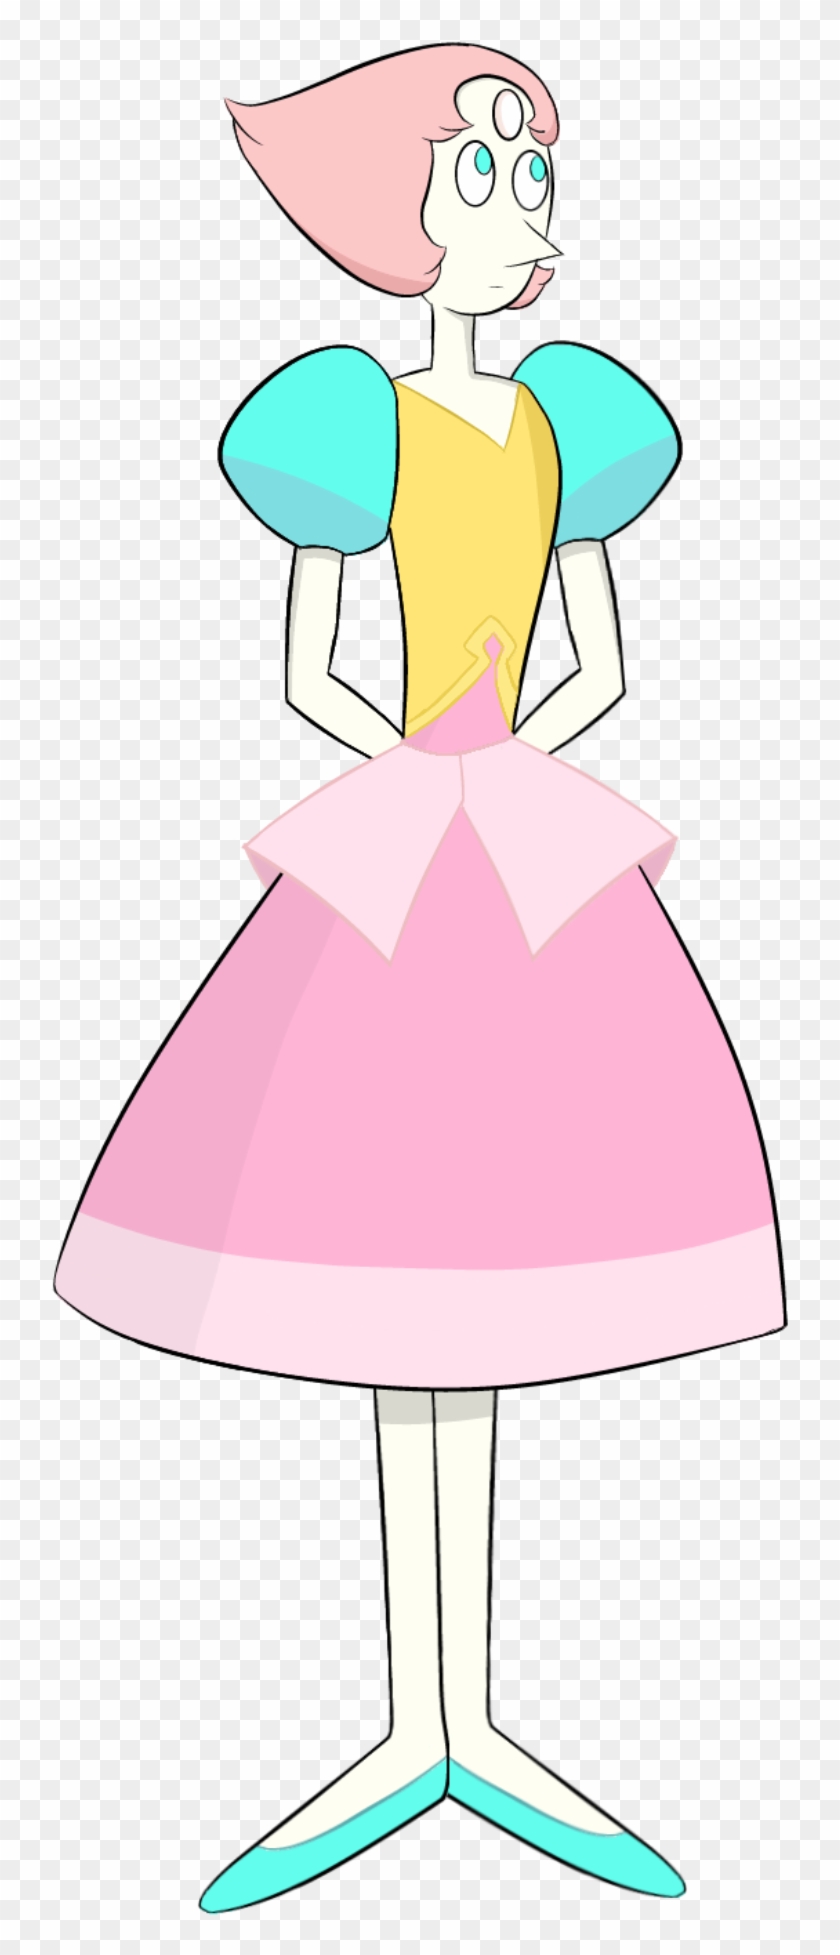 Barbie Doll What If Pink Diamond Treated Pearl As A - Pearl And Pink Diamond #659930